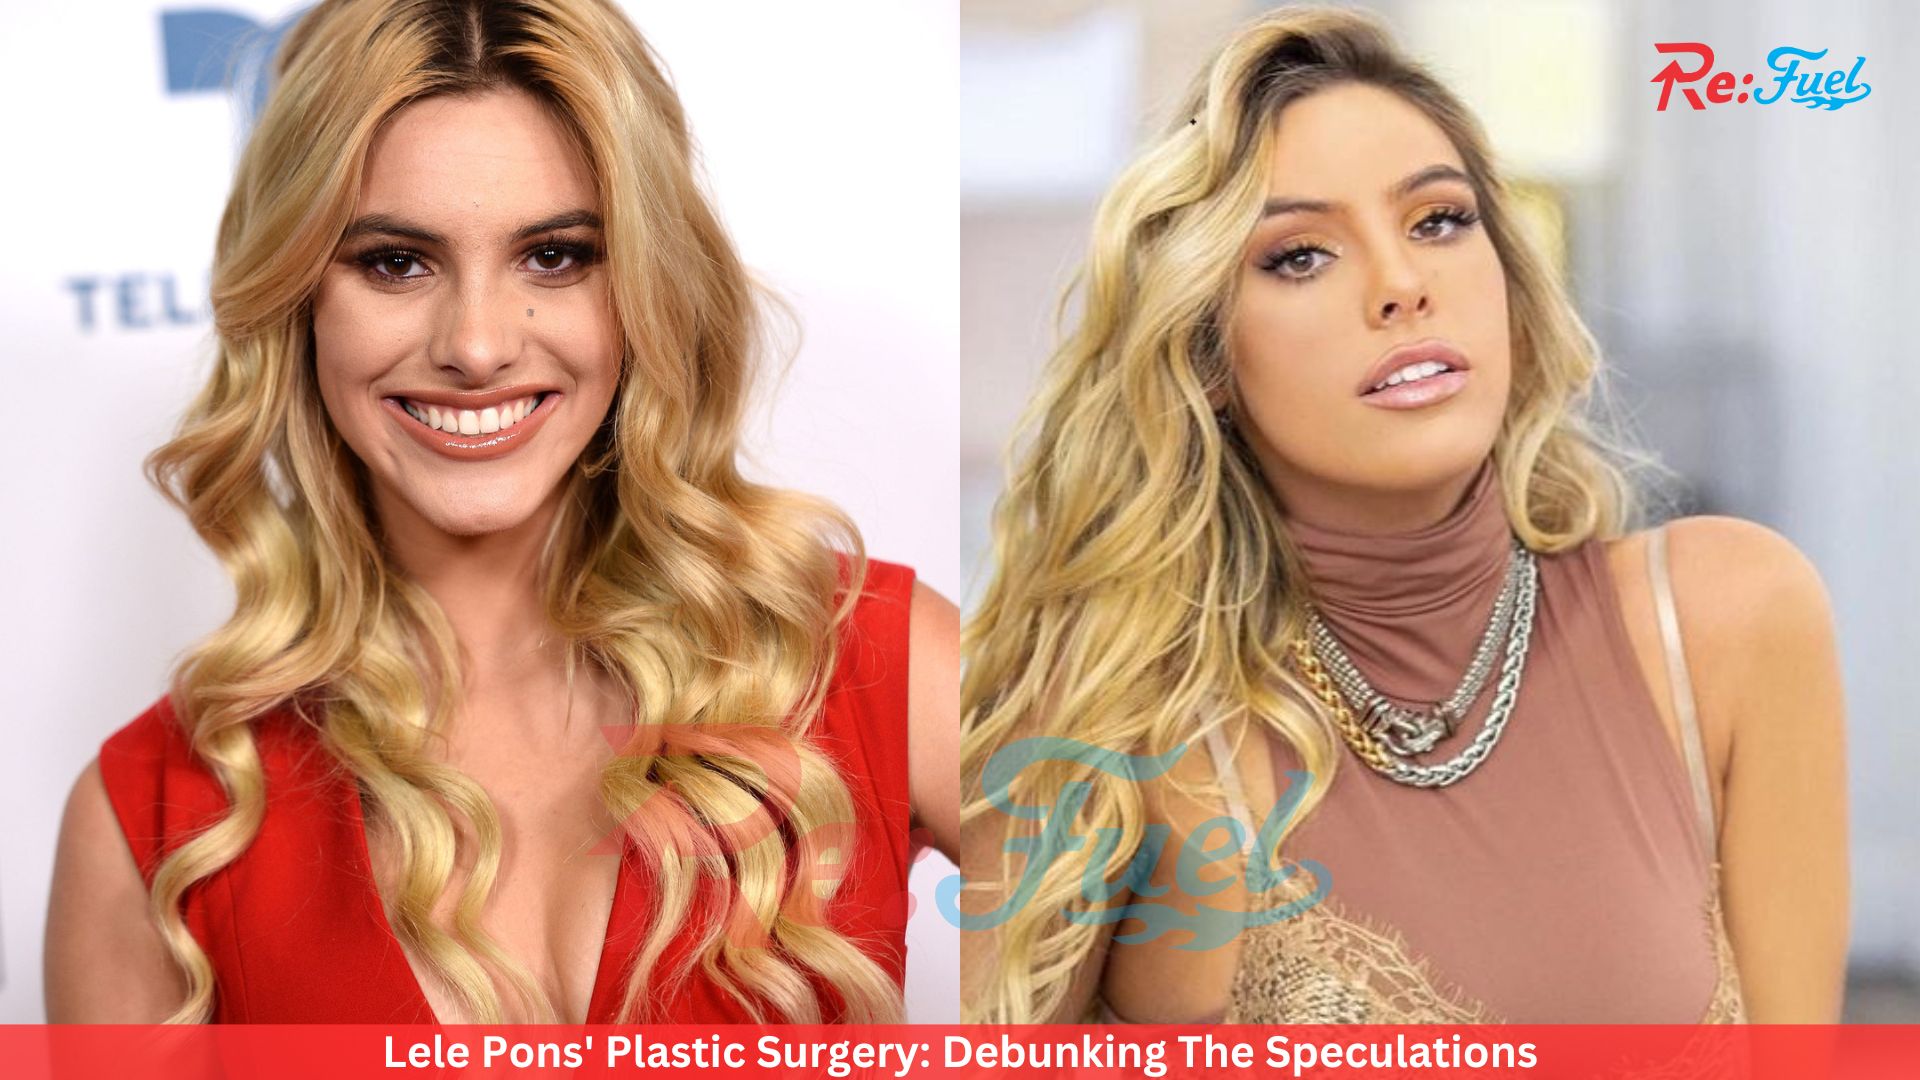 Lele Pons' Plastic Surgery: Debunking The Speculations